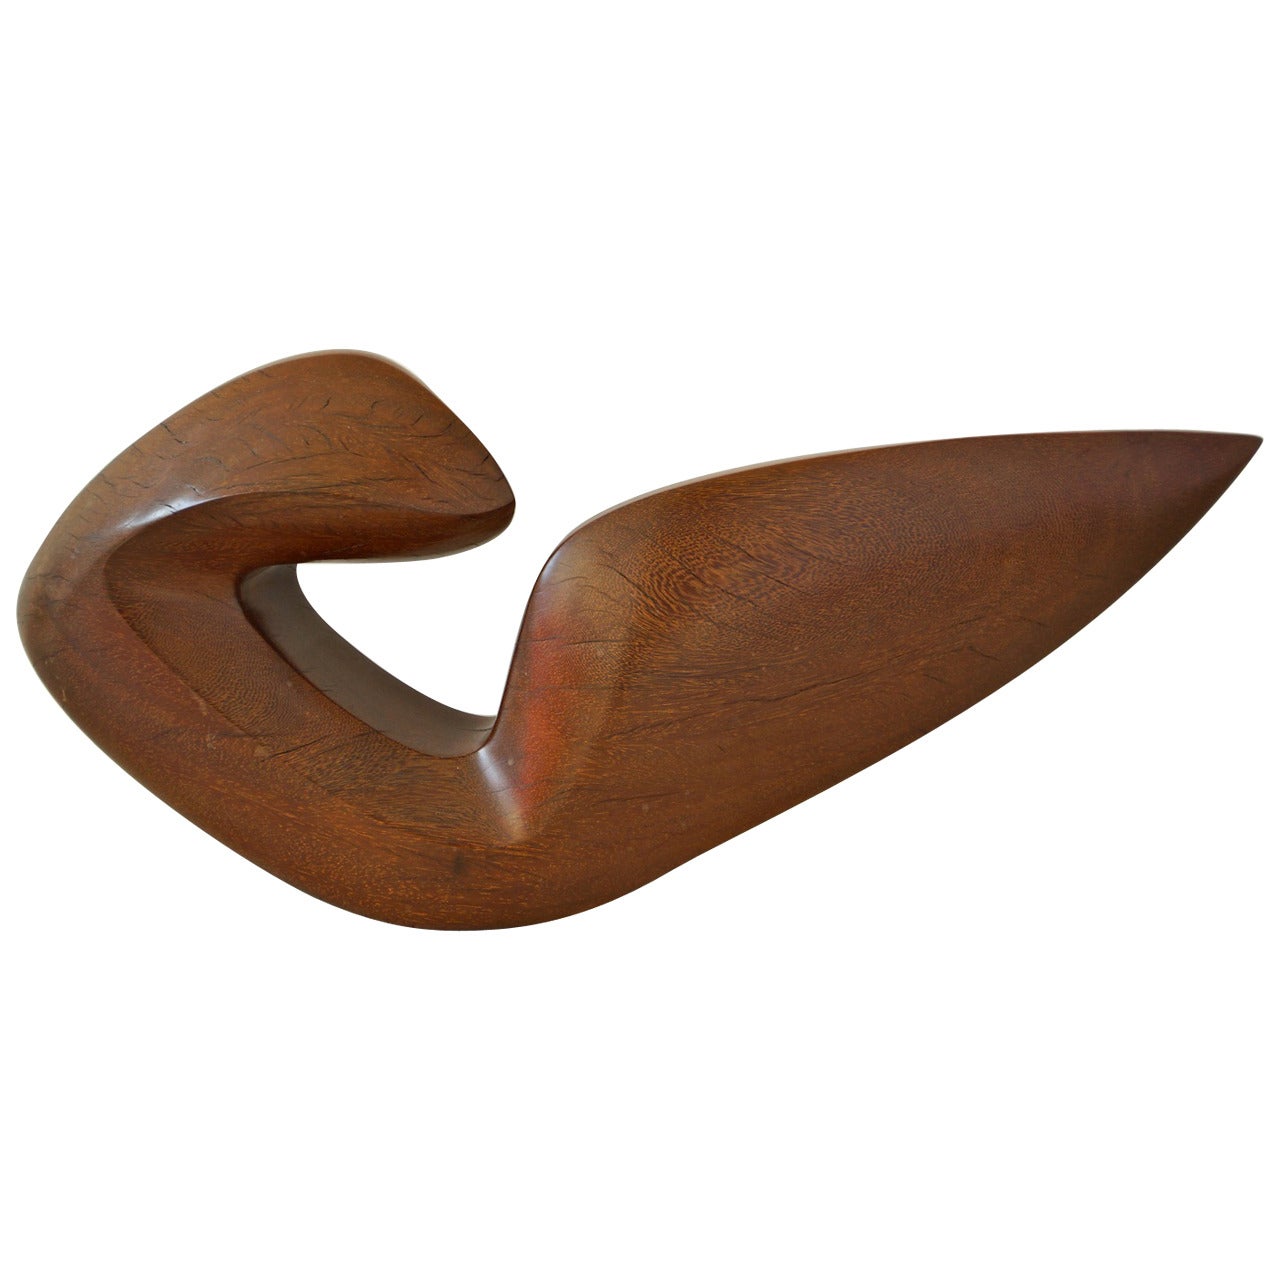 Beautiful Abstract 1950s Teak Sculpture by Dolf Breetvelt For Sale